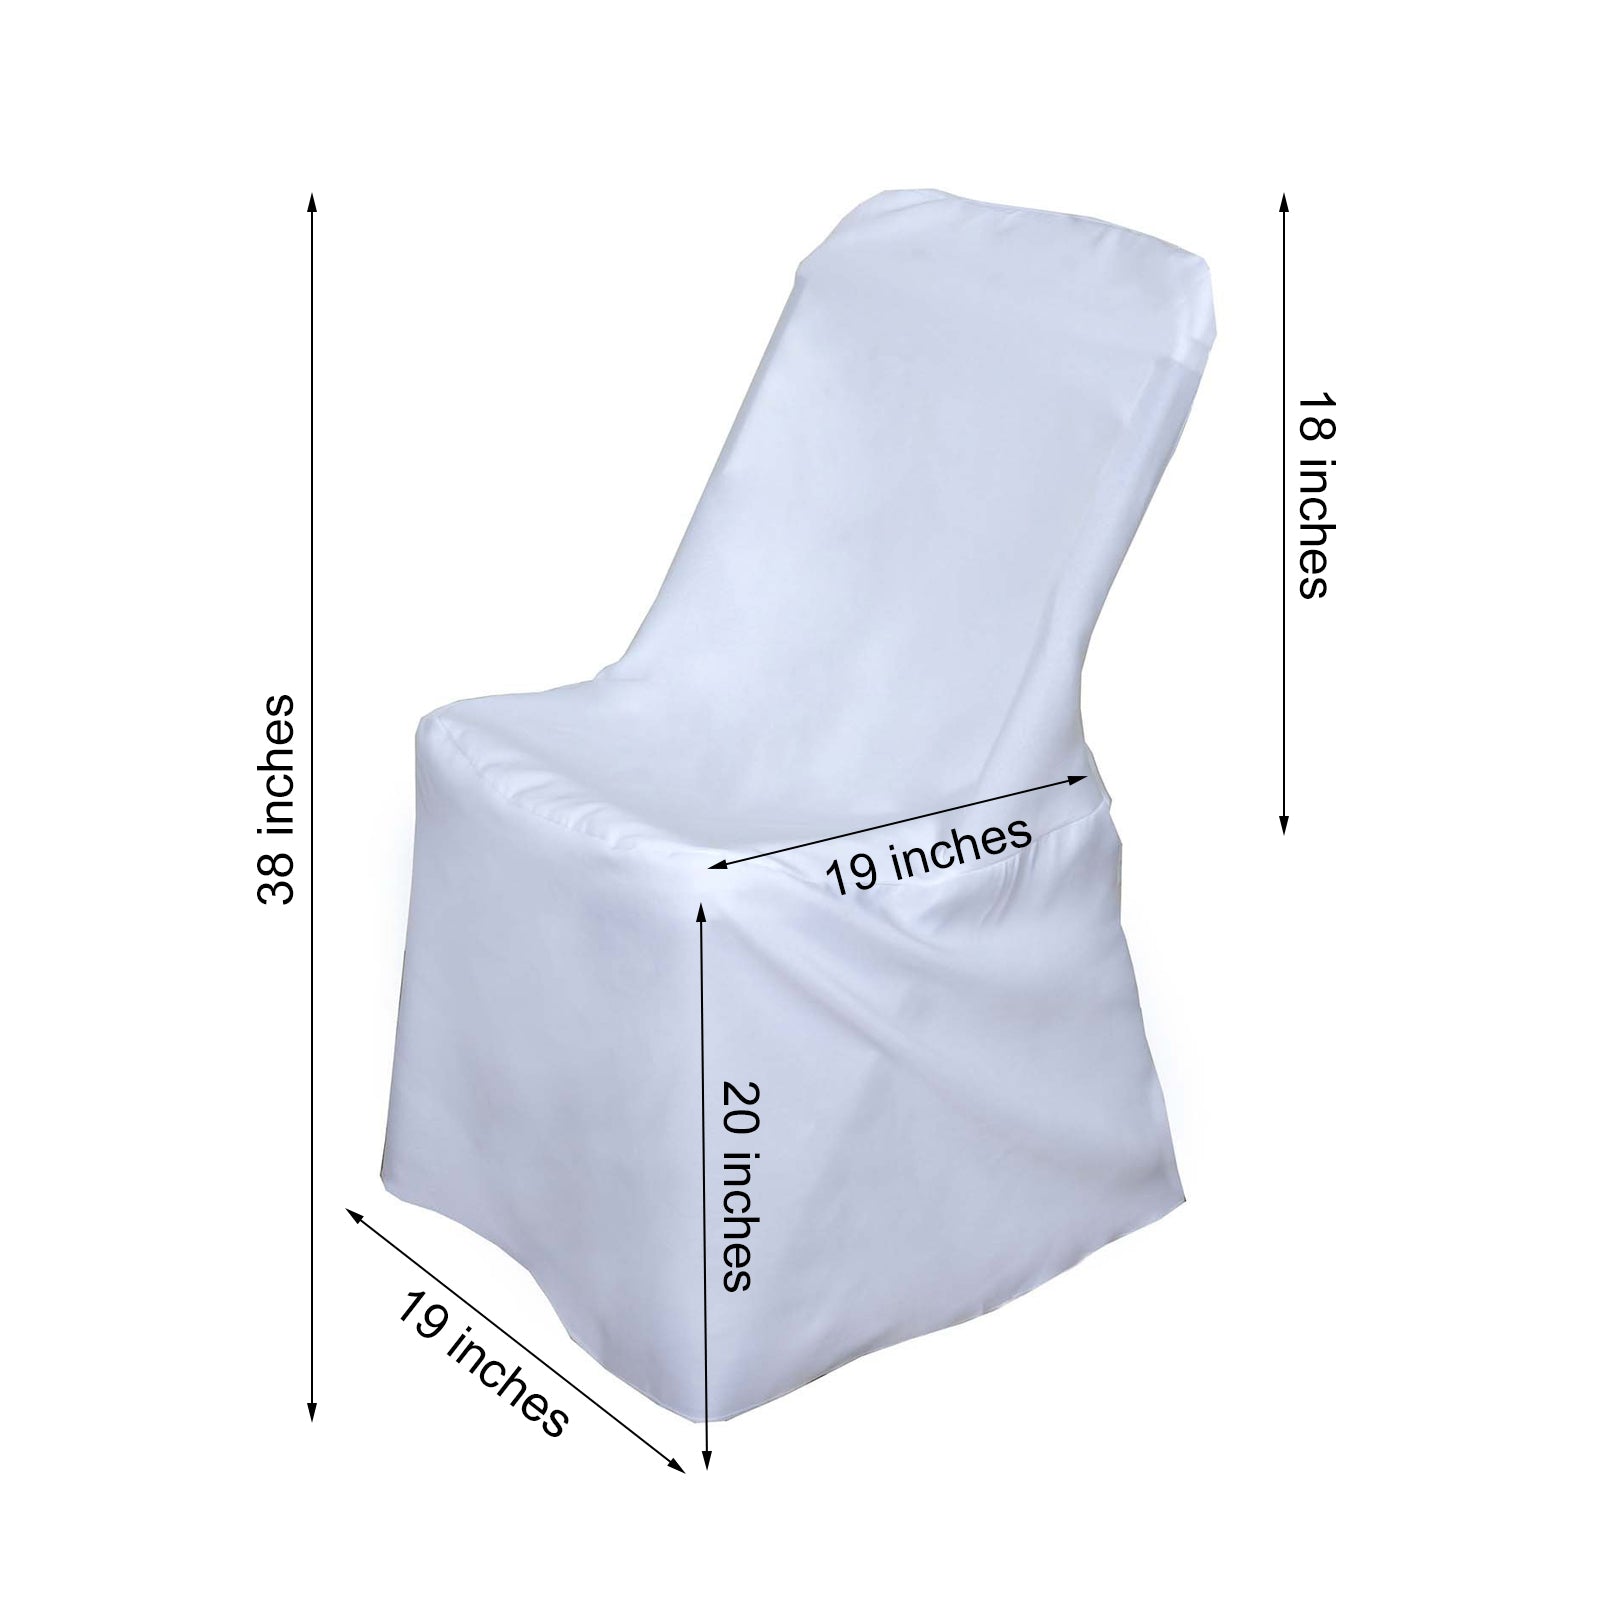 White Polyester Lifetime Folding Chair Covers Tablecloths